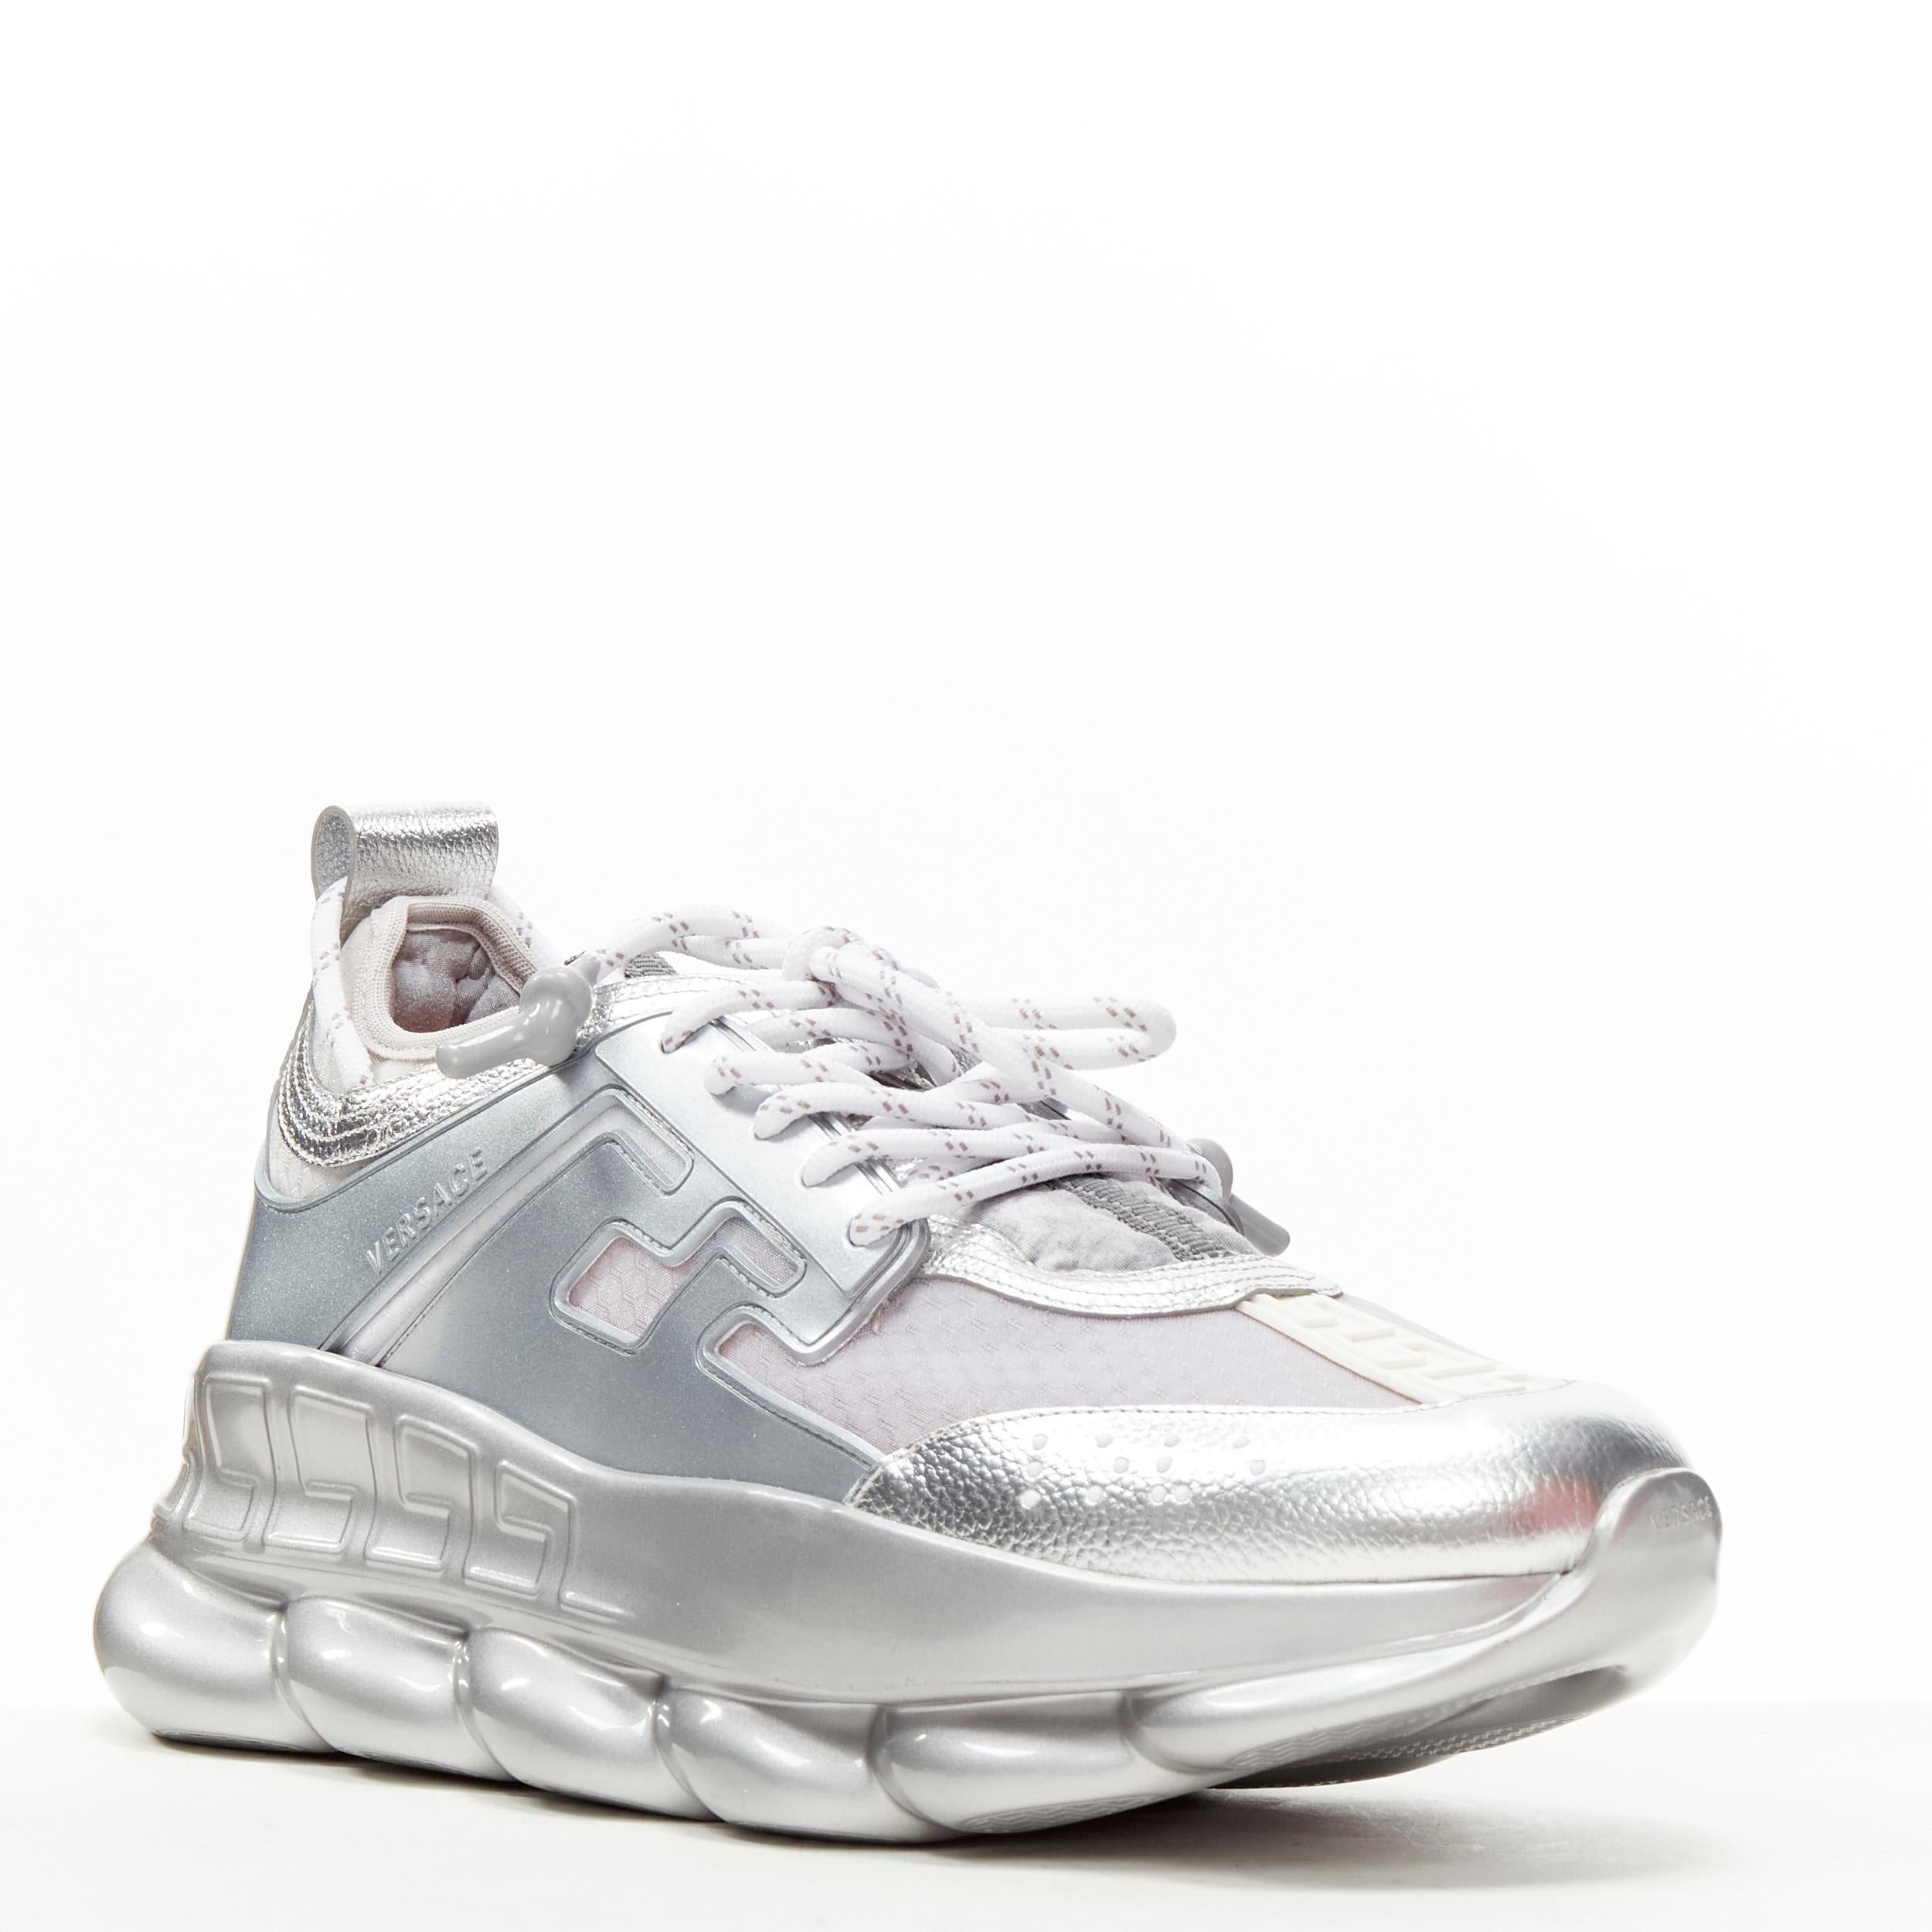 new VERSACE Chain Reaction metallic silver sheer low top chunky sneaker EU46 
Reference: TGAS/C00775 
Brand: Versace 
Designer: Donatella Versace 
Model: DSU7071E D10TCG D9201 
Collection: Chain Reaction 
Material: Mesh 
Color: Silver 
Pattern: